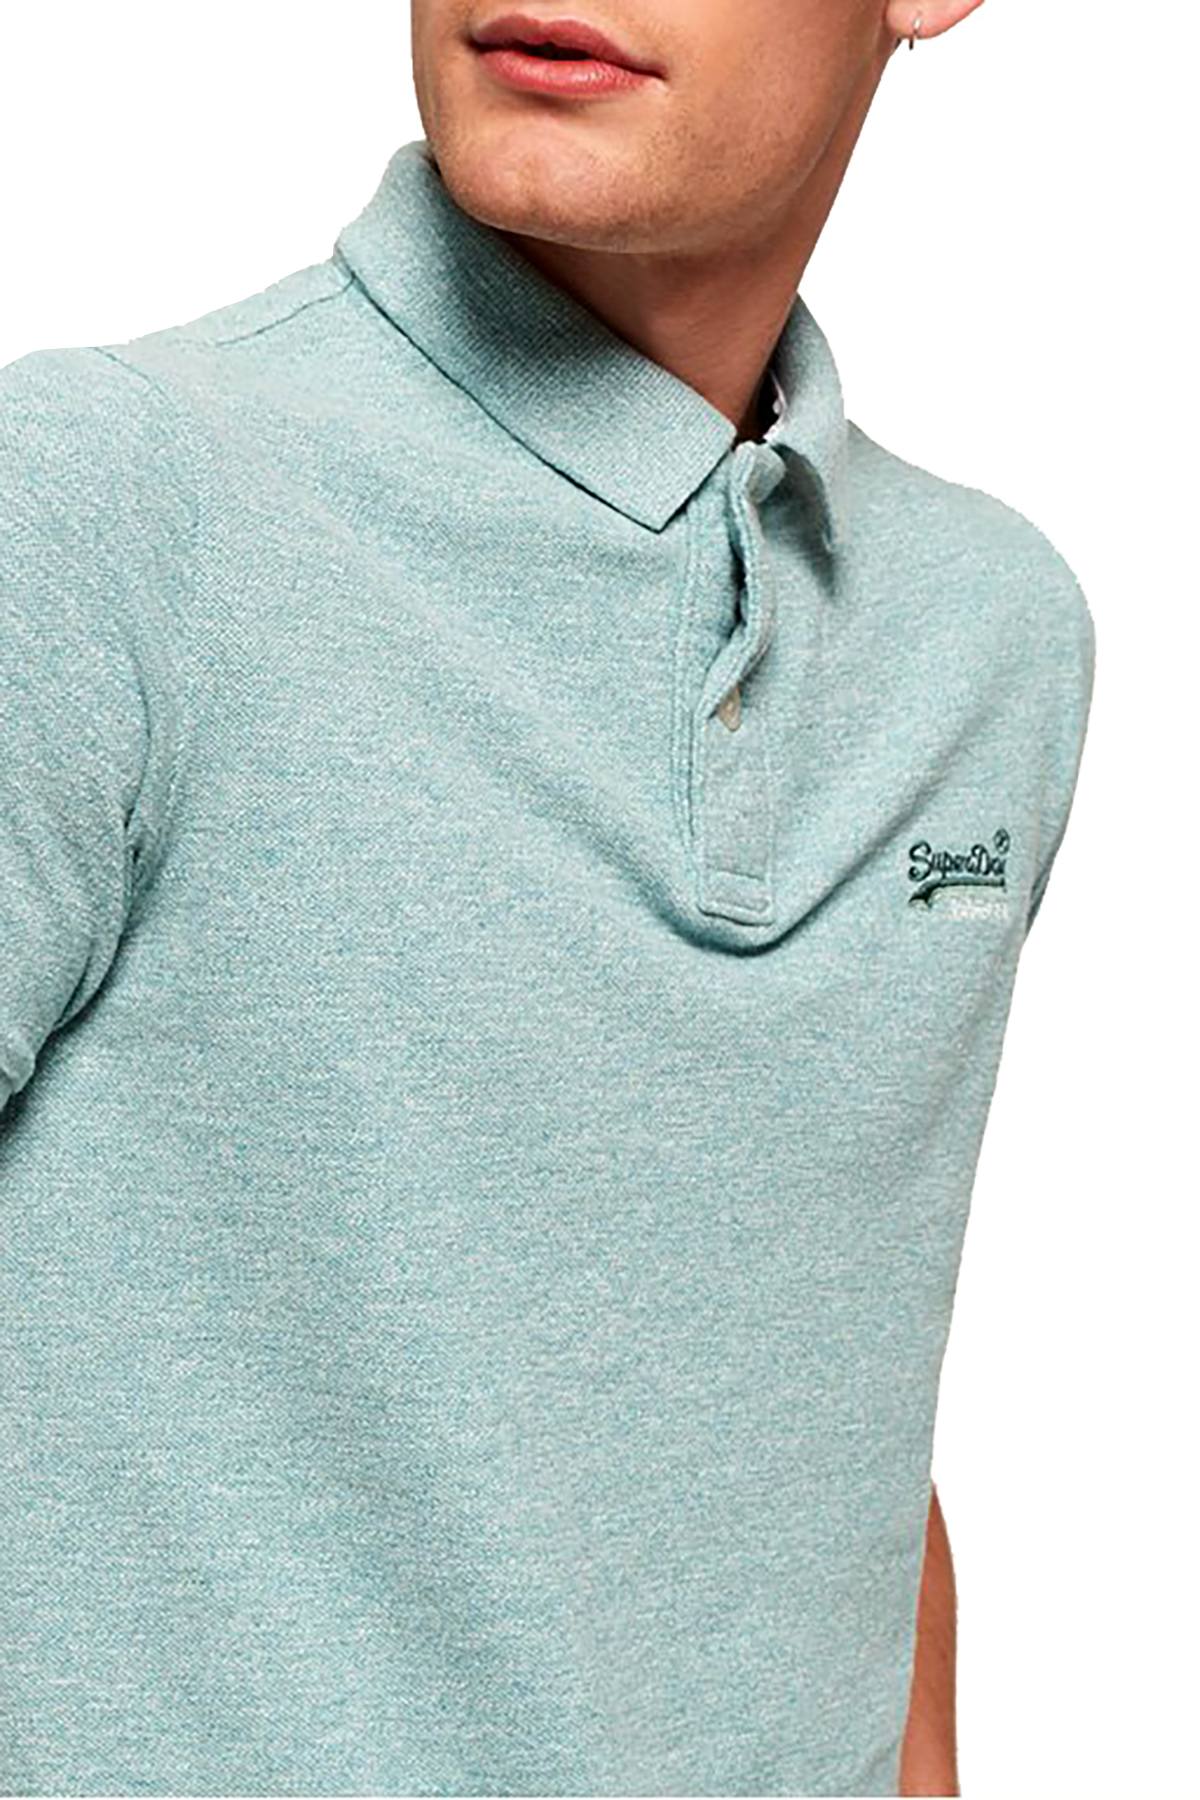 SuperDry Mint-Green-Grindle Classic Pique Polo Shirt